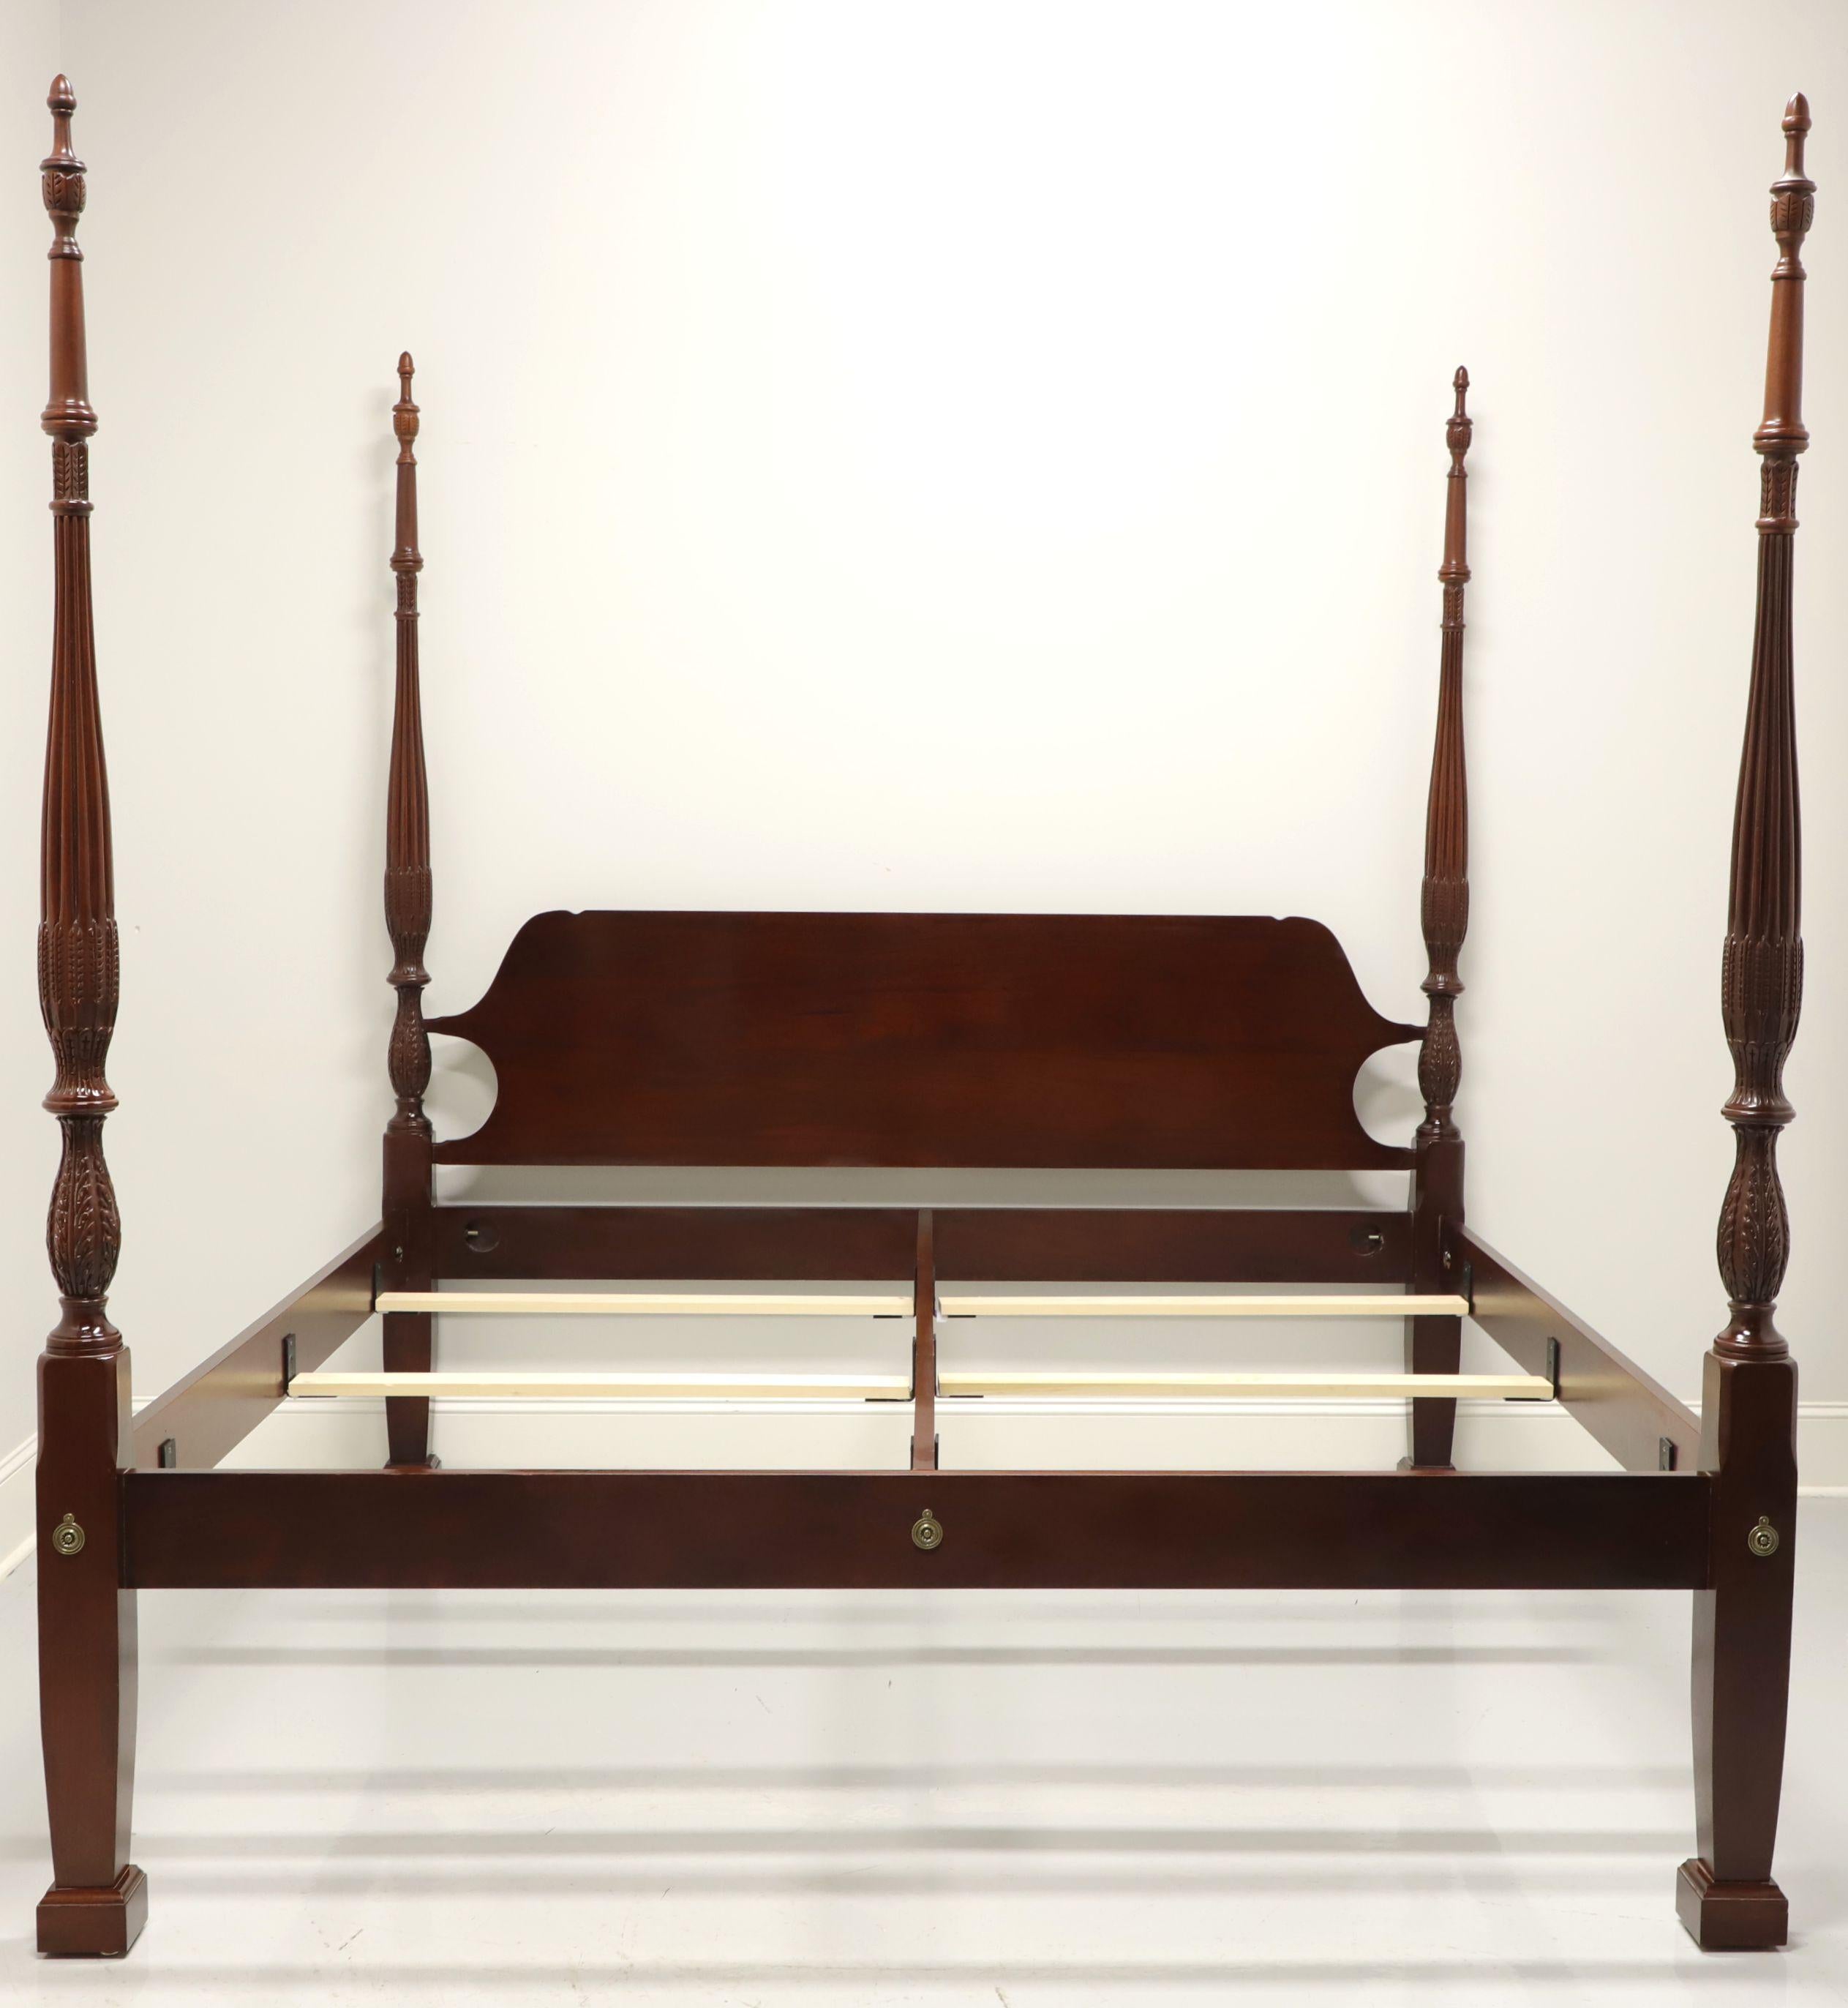 A Traditional style king size poster bed by Craftique, of Mebane, North Carolina, USA. Solid mahogany with four rice carved posts with finials and brass hardware. Wood slats affix to metal brackets on center rail and side rails for mattress support.